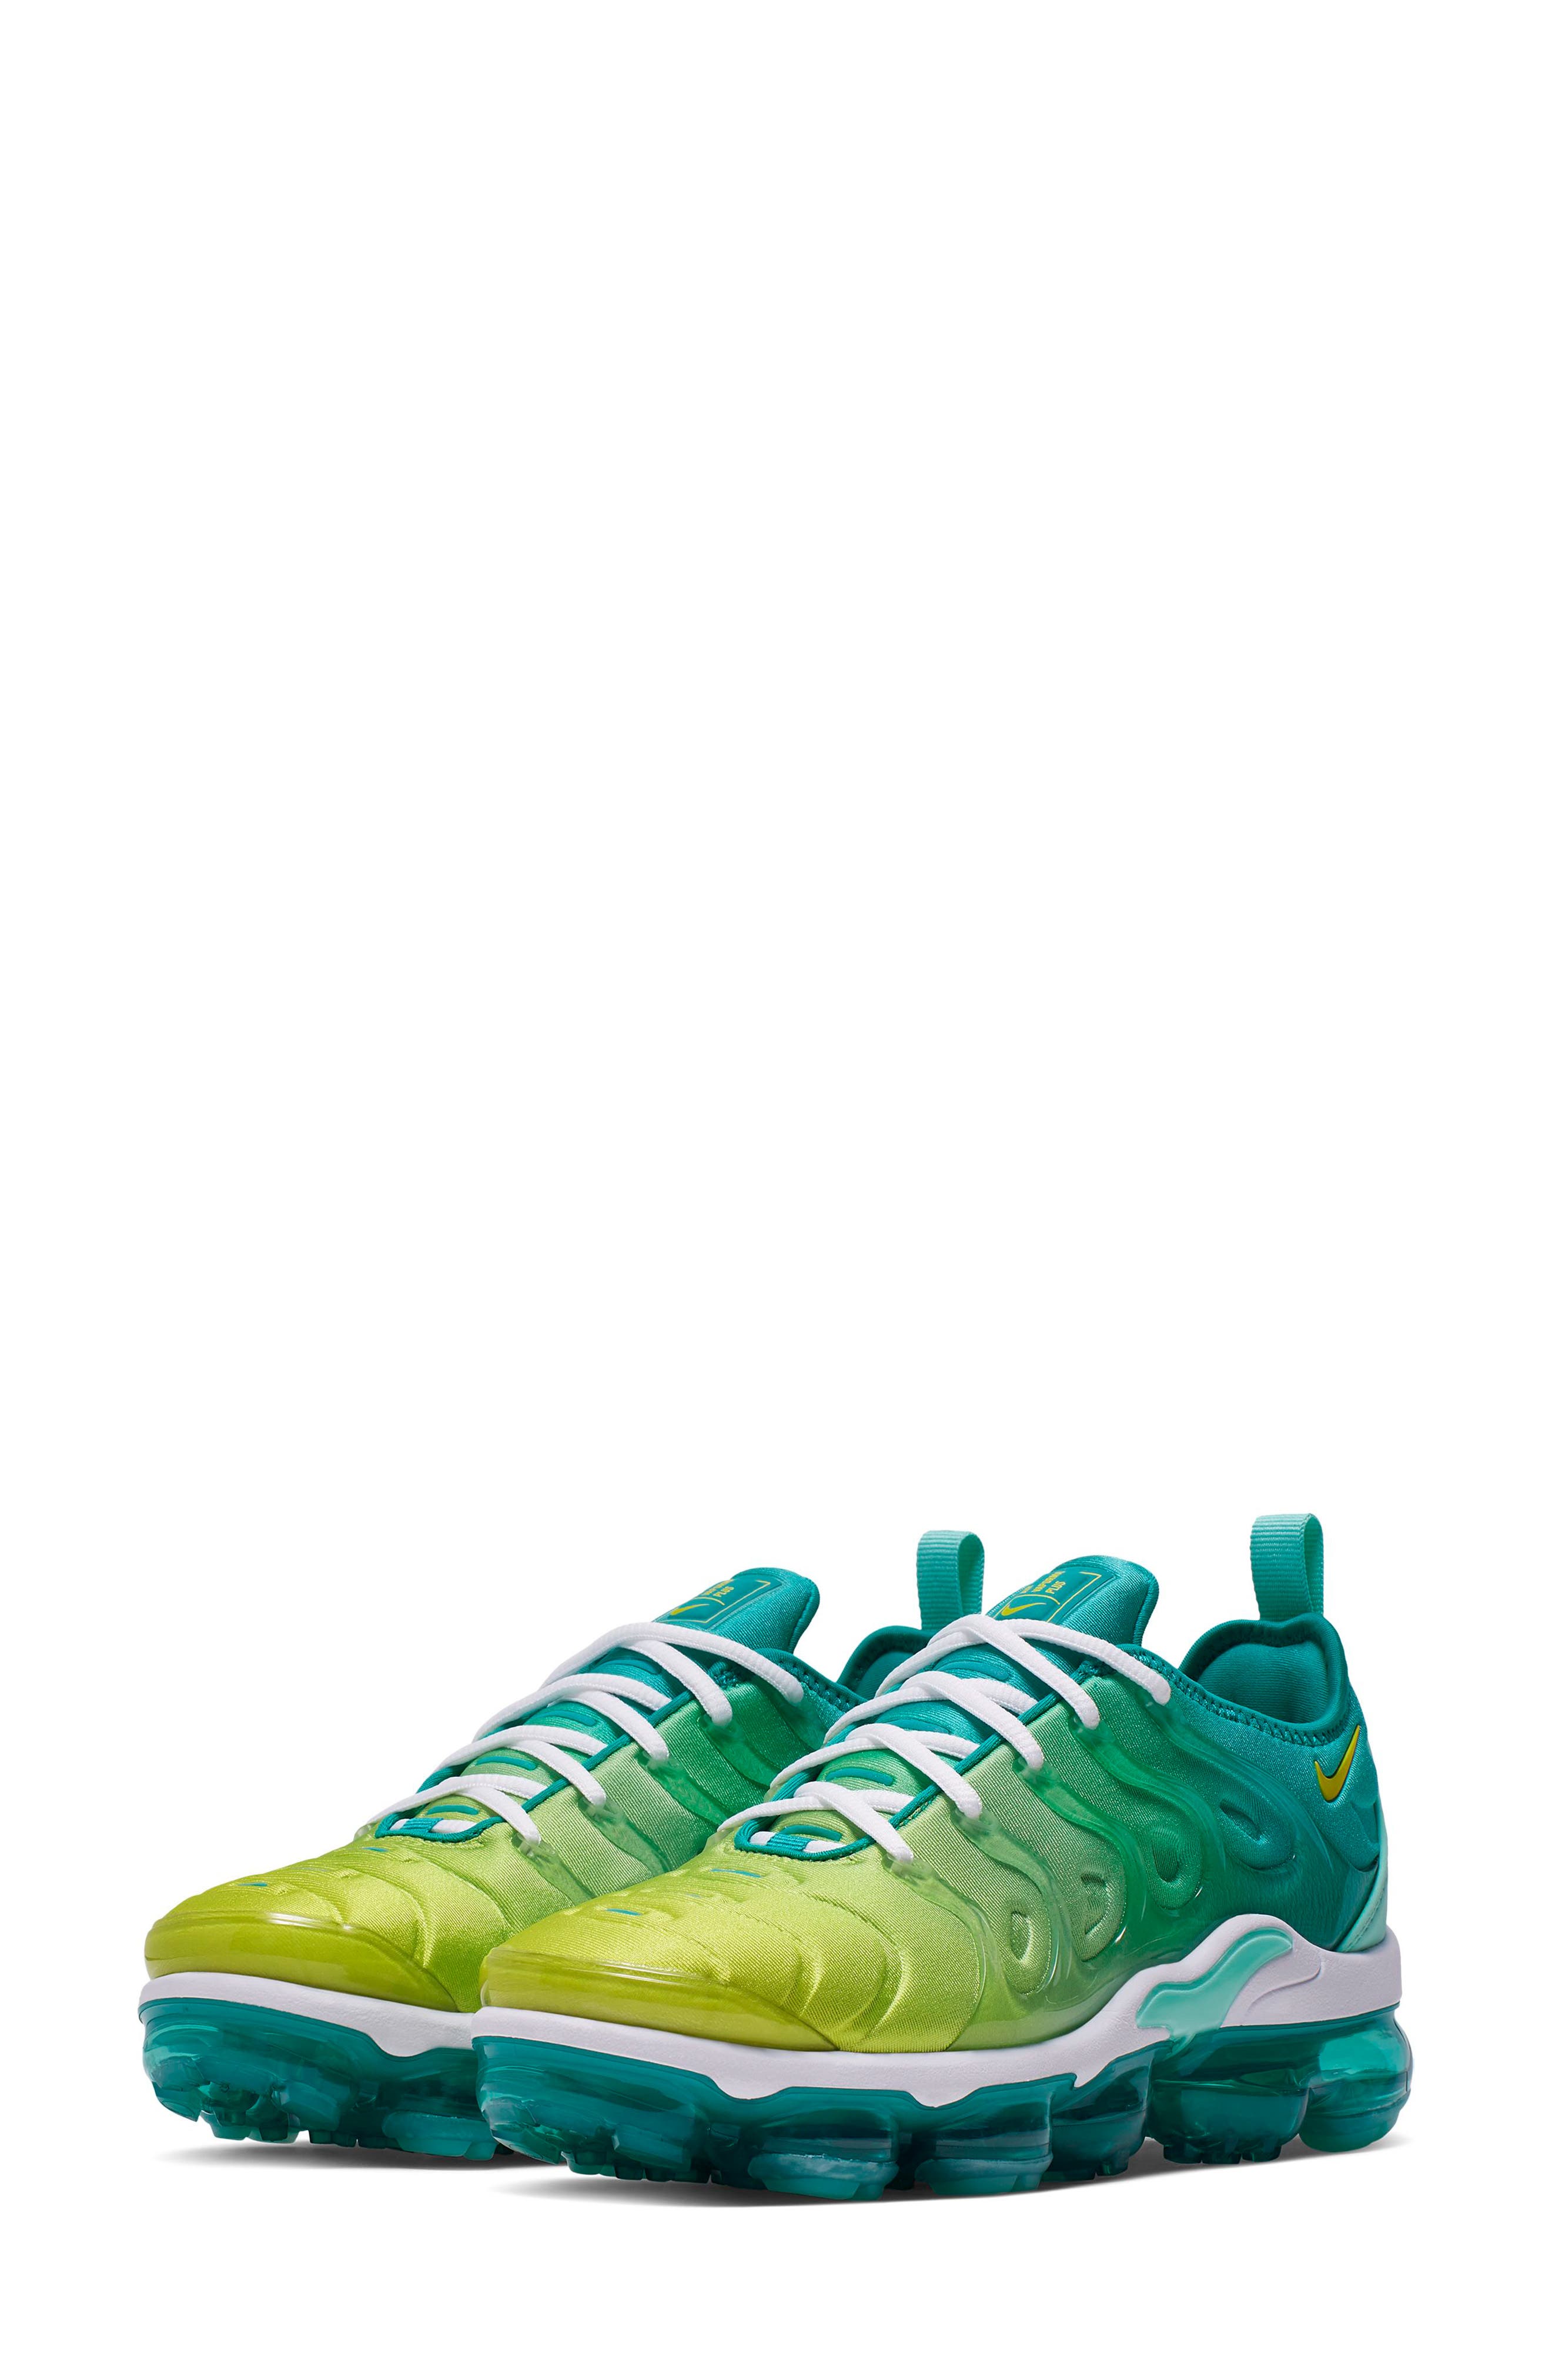 vapormax green and blue